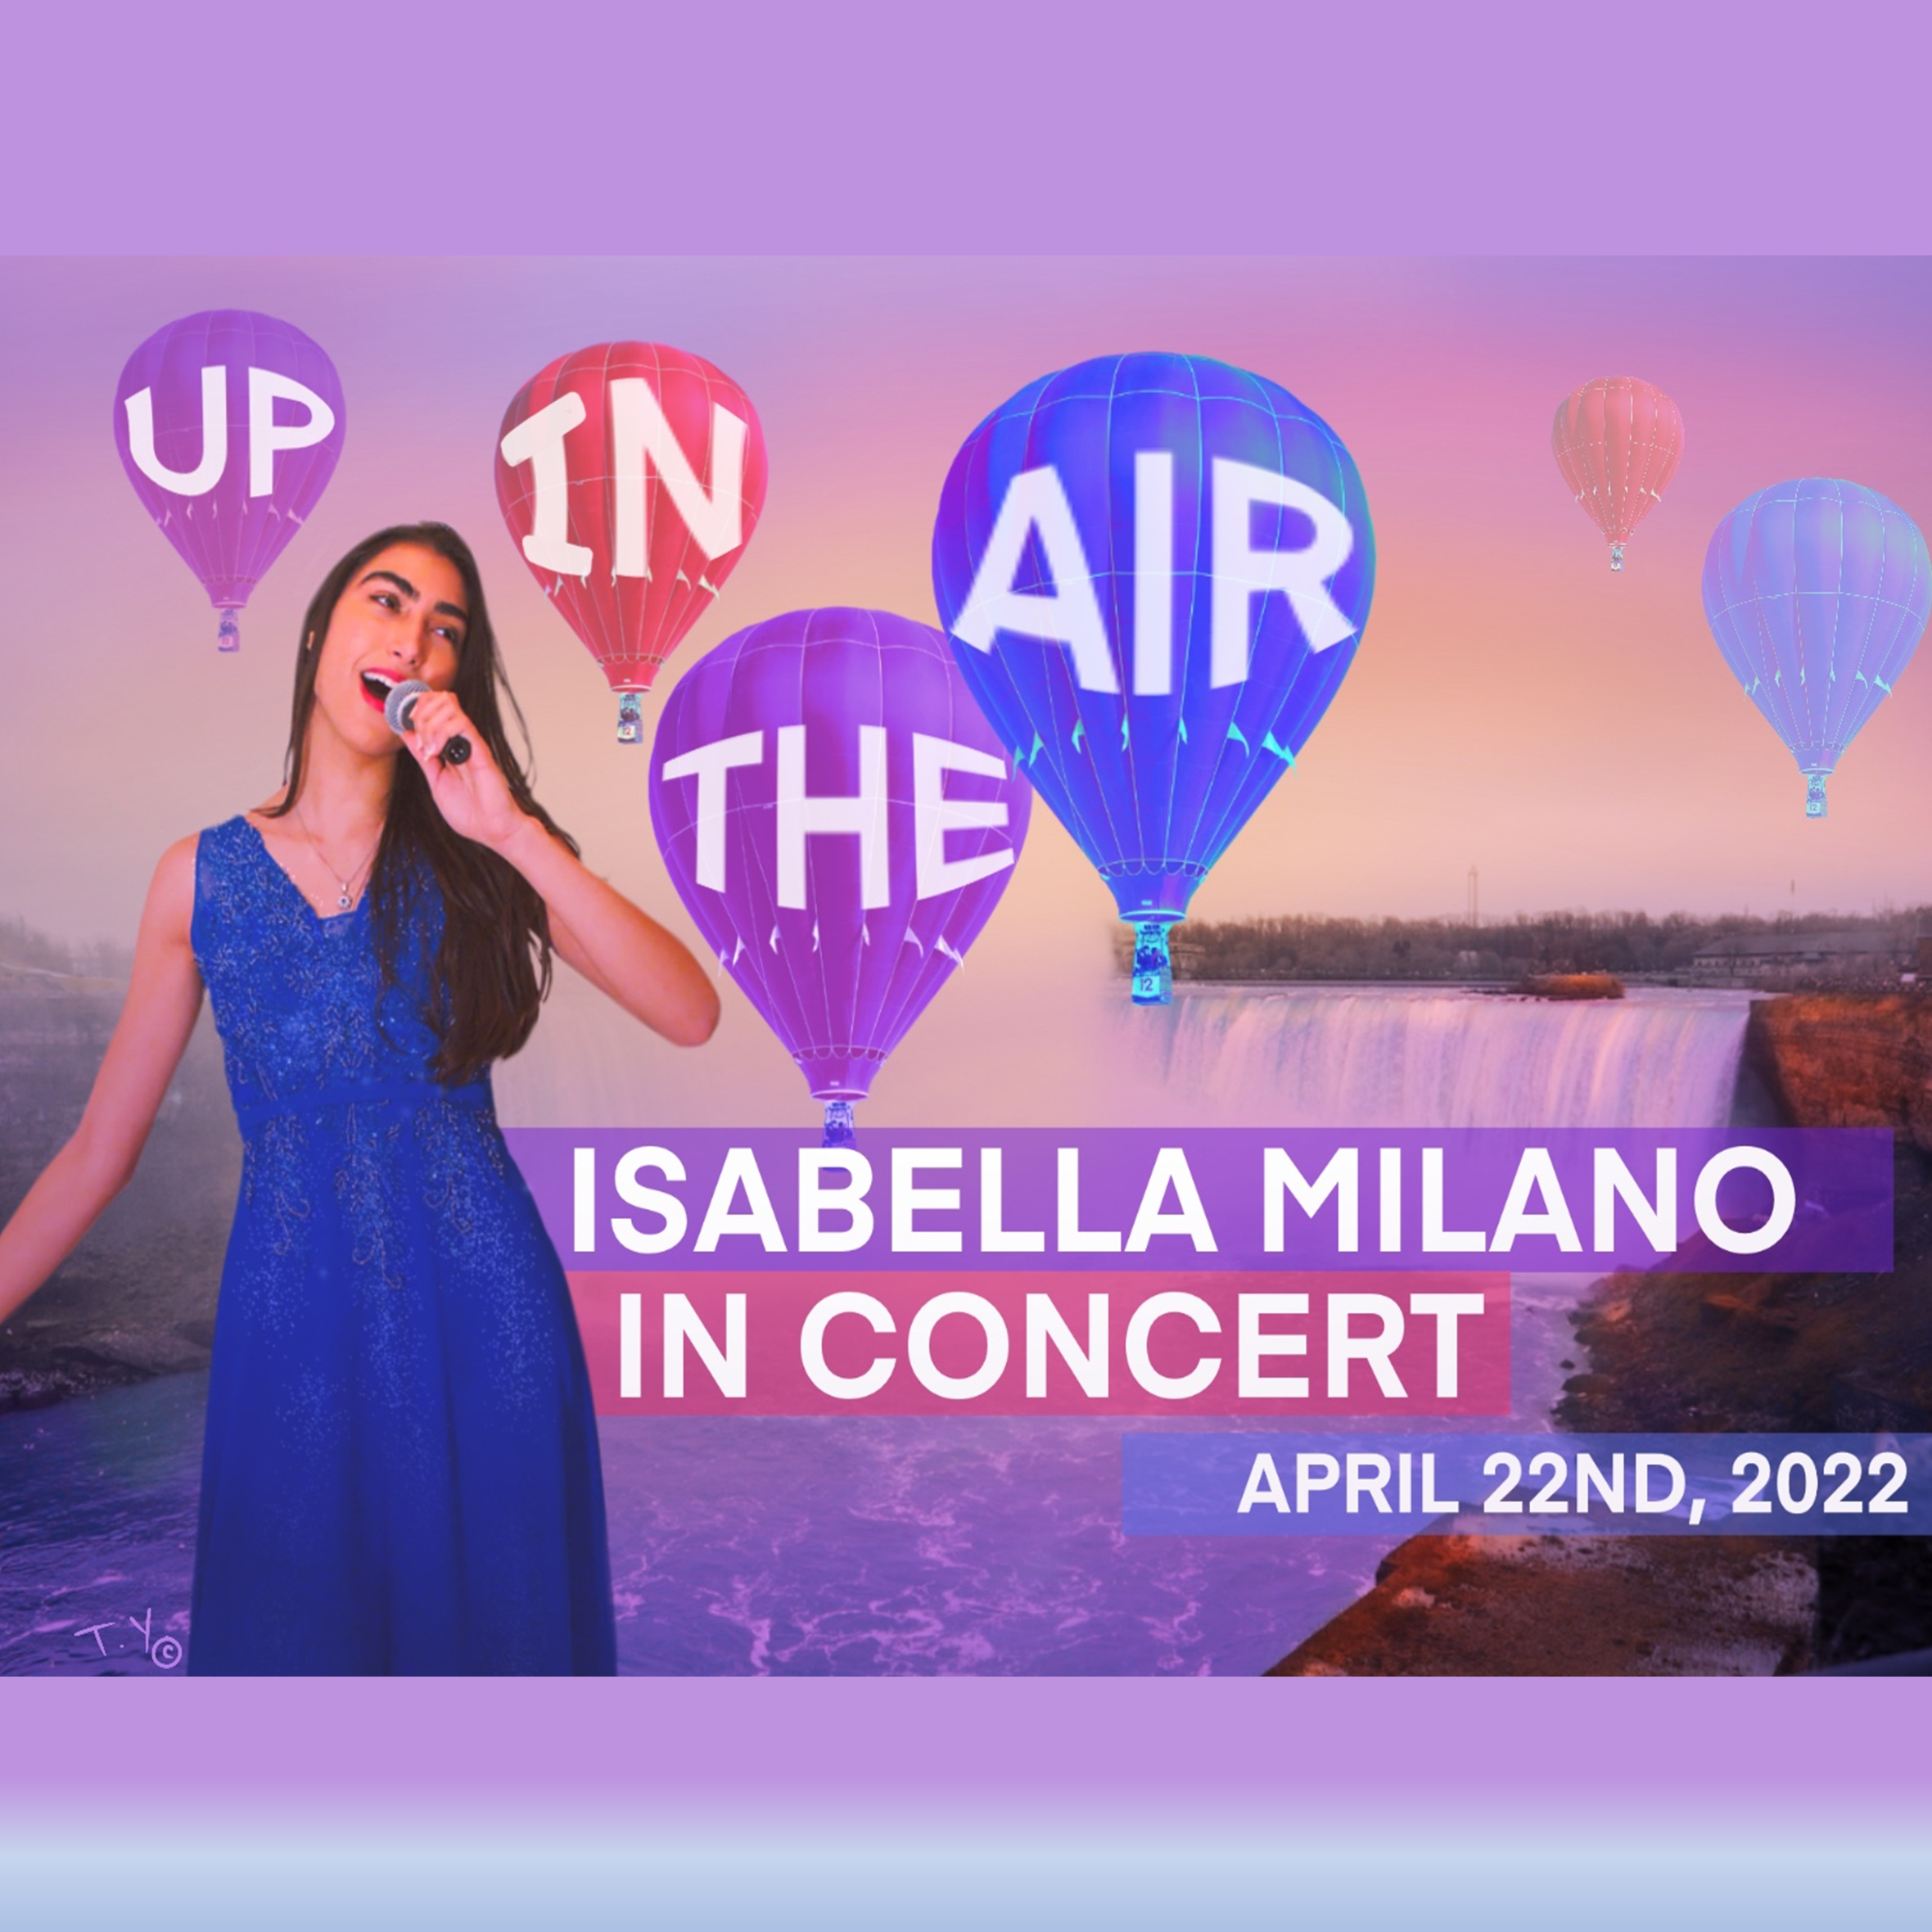 ‘Up  in the Air’ Isabella Milano in Concert